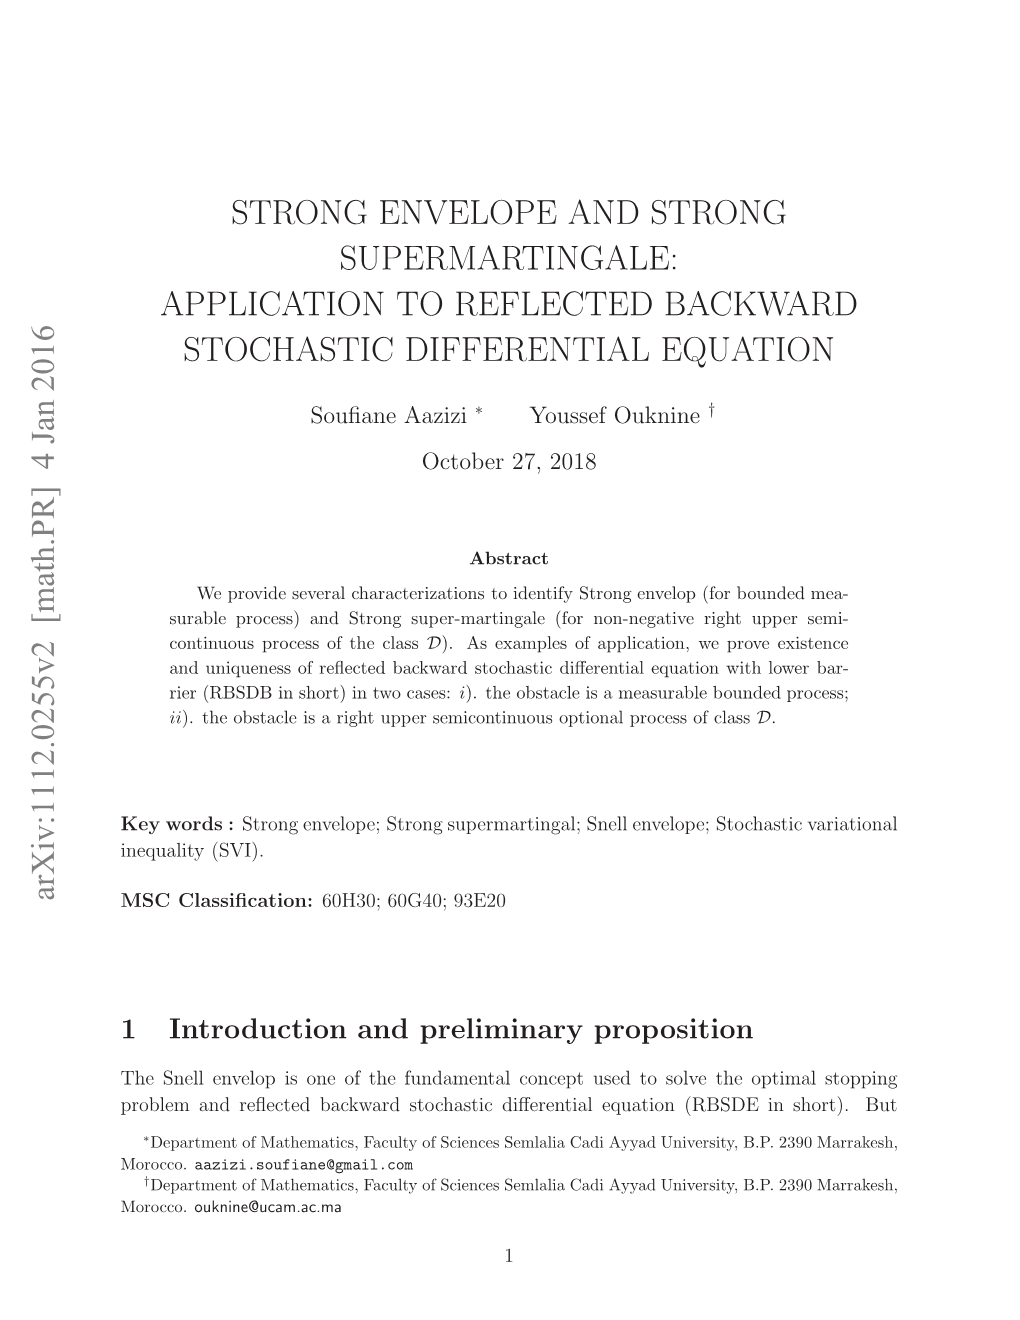 Strong Envelope and Strong Supermartingale: Application To